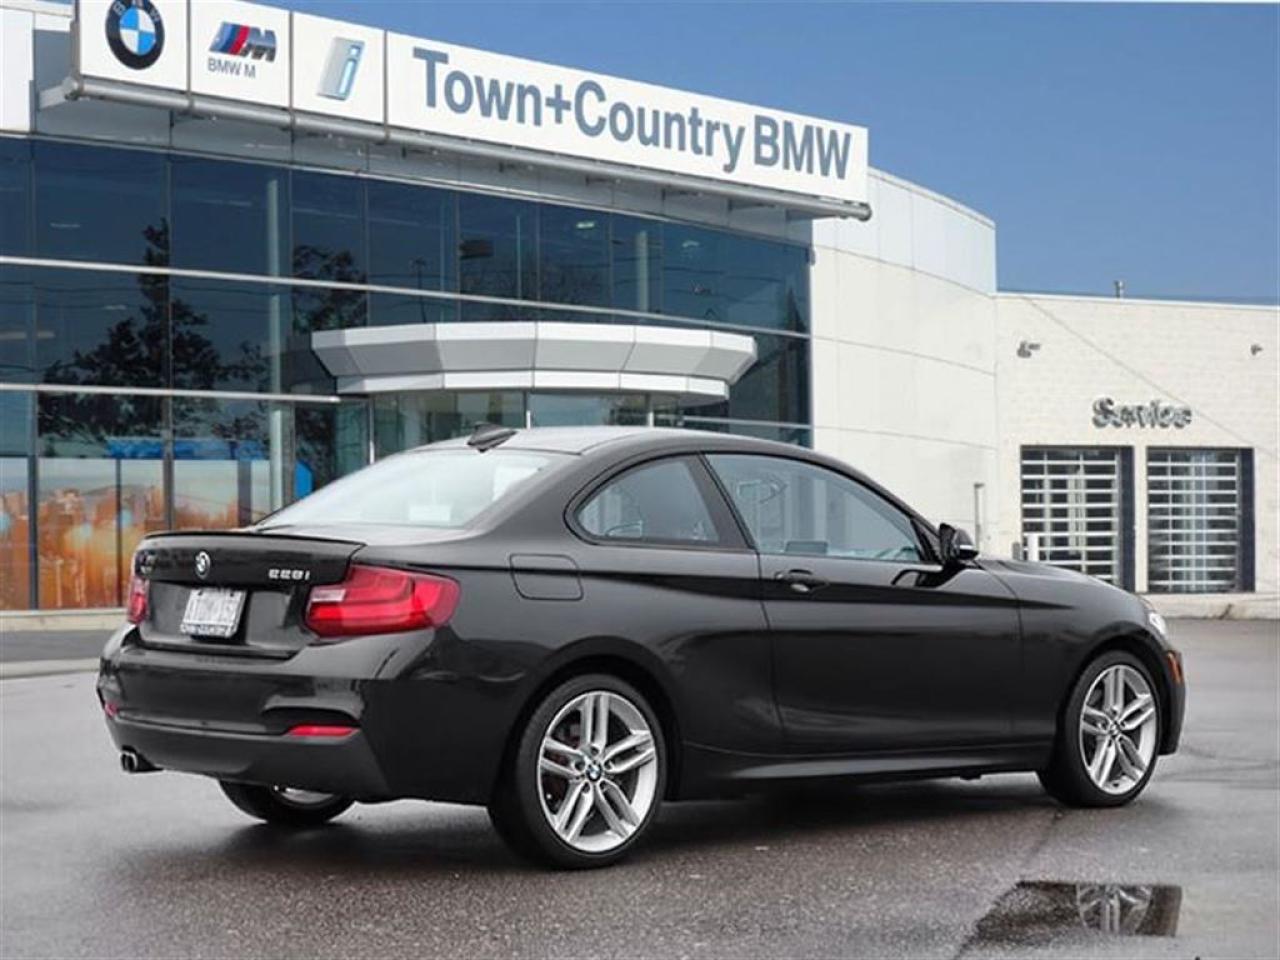 Used 2016 BMW 228i Xdrive Coupe Premium Package Enhanced/Executive Pa for Sale in ...1024 x 768